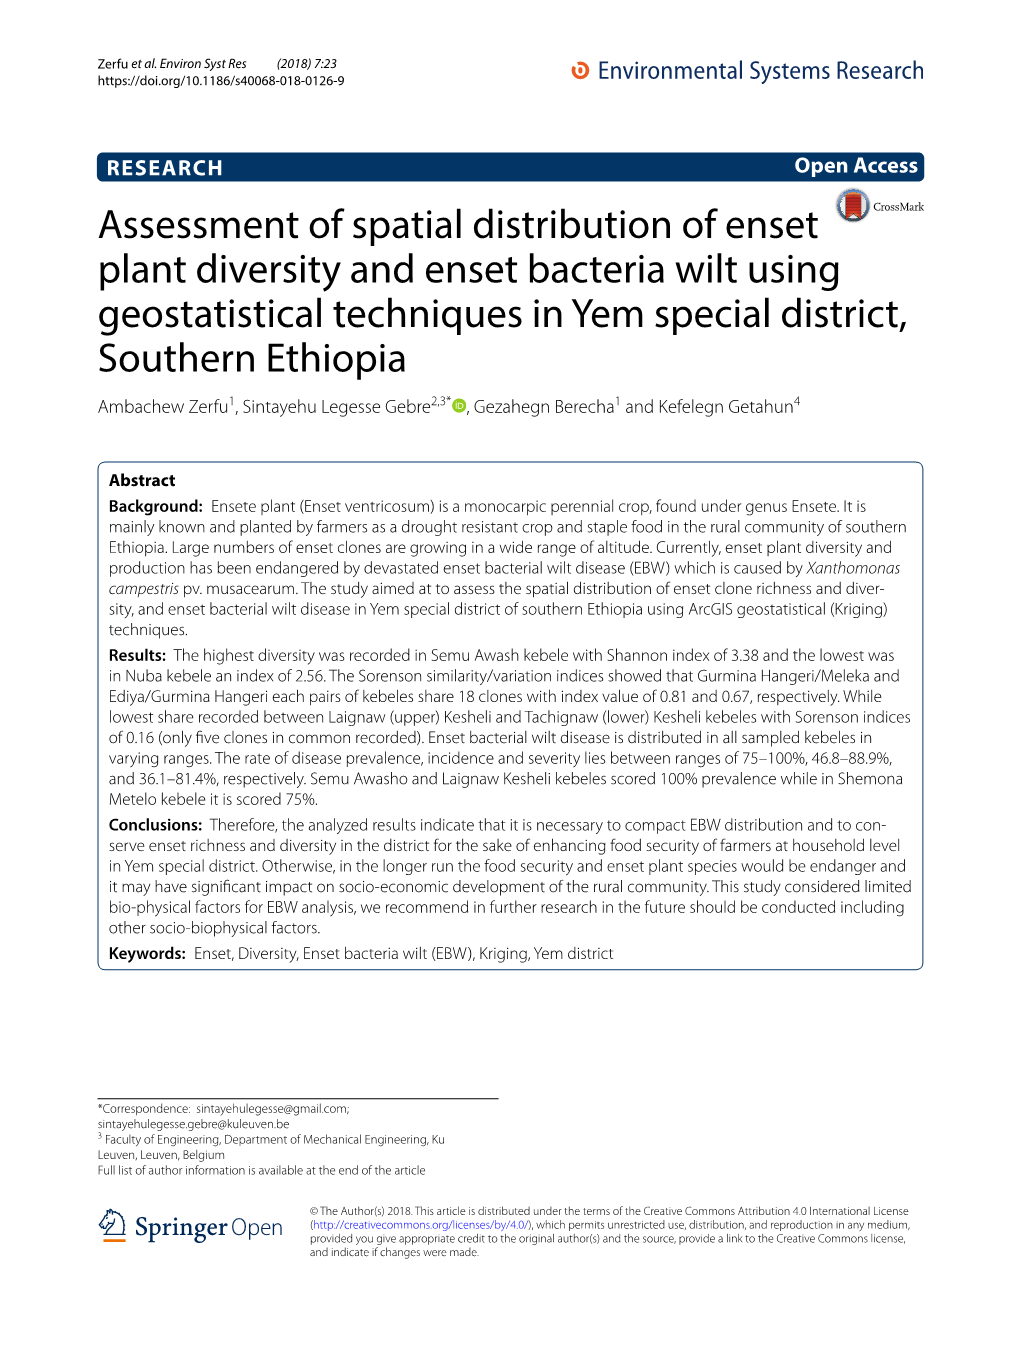 Assessment of Spatial Distribution of Enset Plant Diversity and Enset